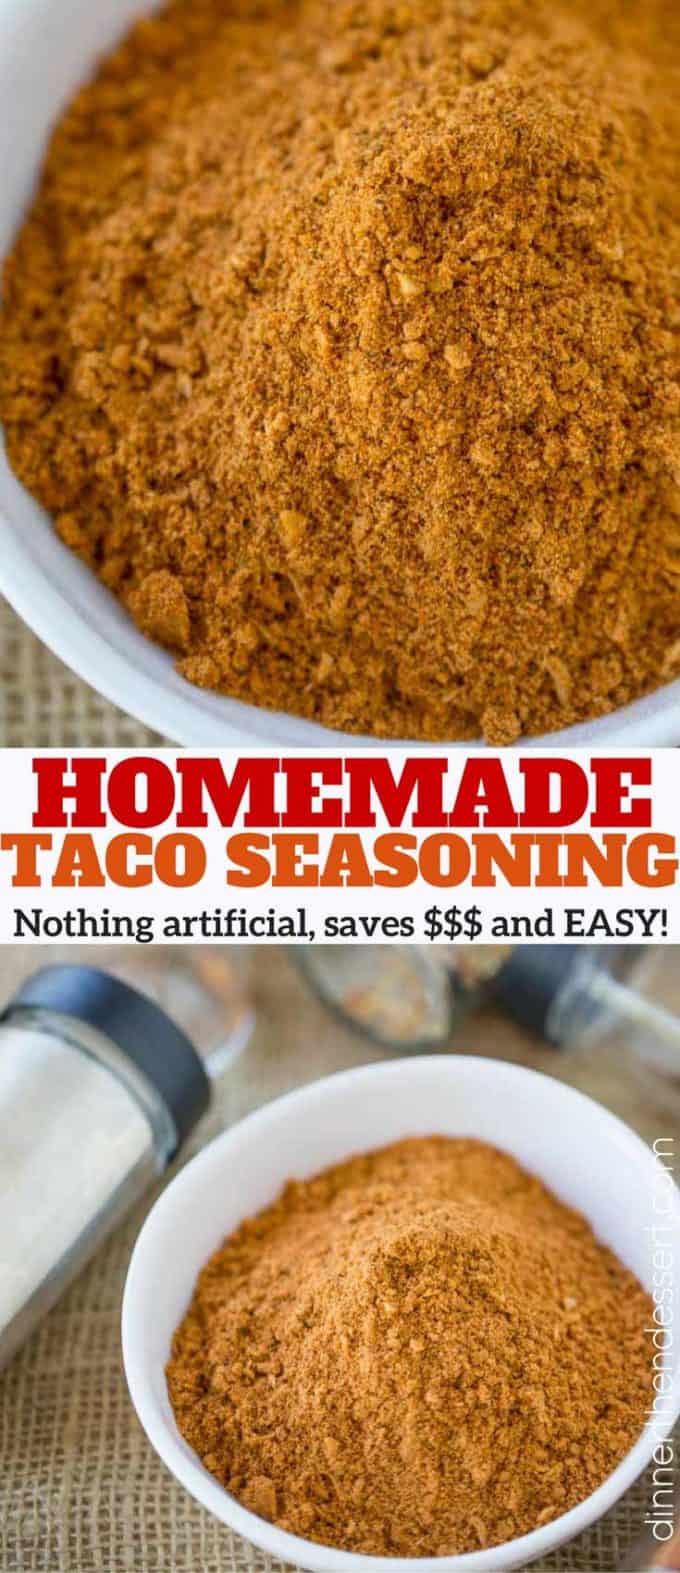 Homemade Taco Seasoning without artificial ingredients and much less sodium! Easy to make and store. Saves money over the packaged taco seasoning packets!